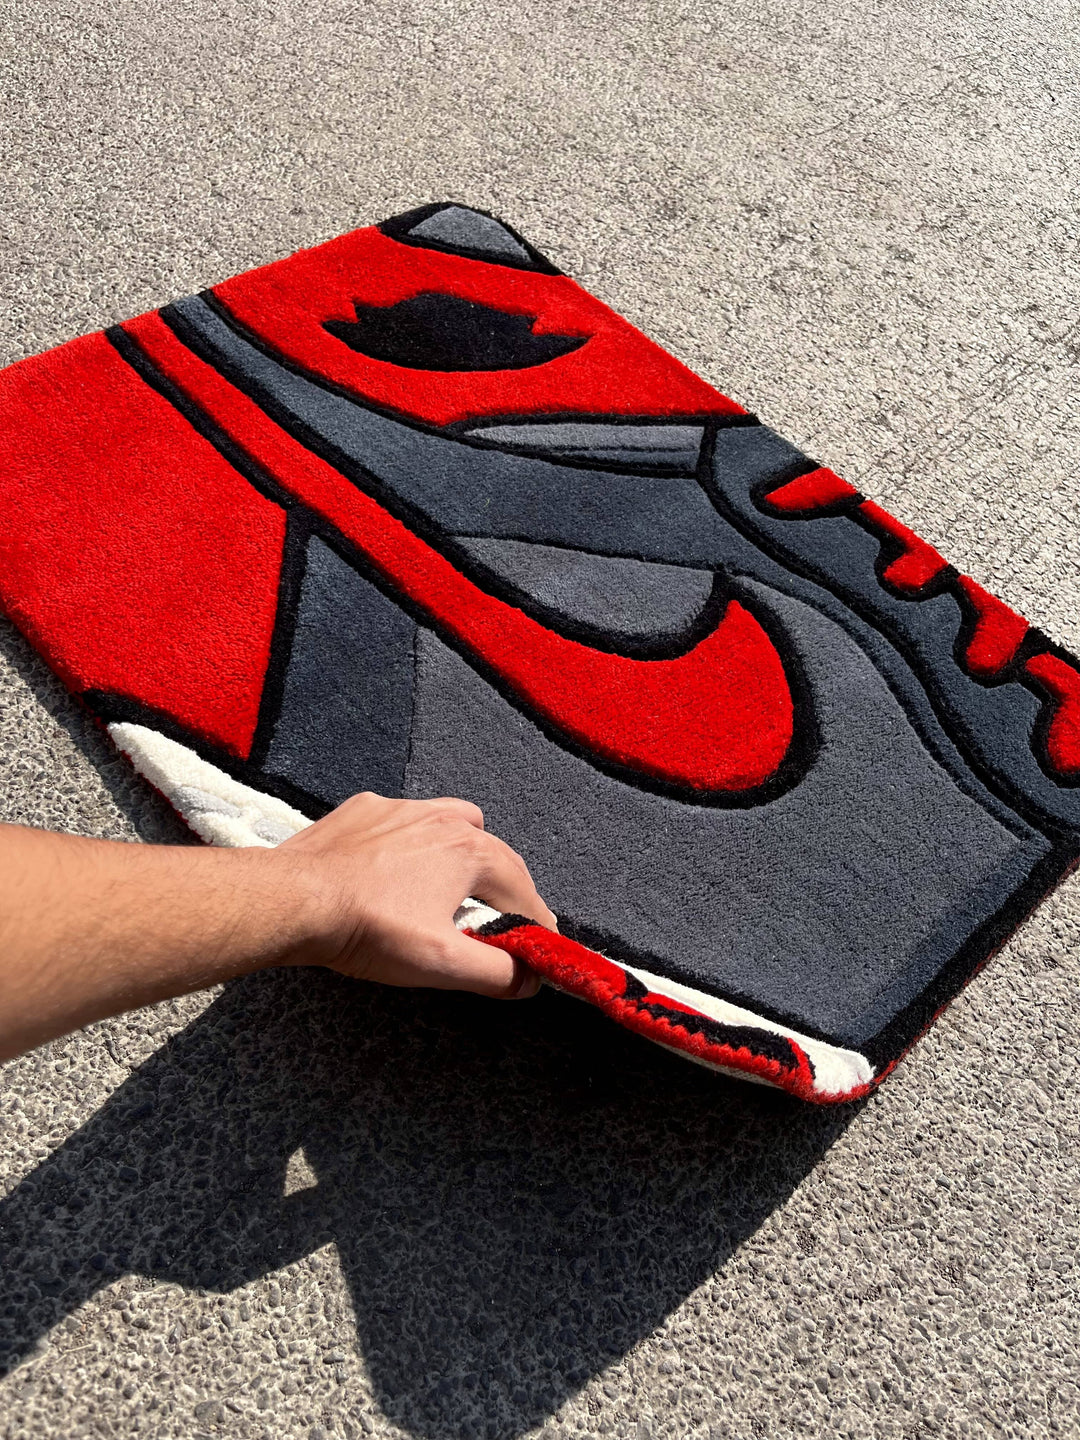 The Sneaker Art 01 Rugs Tuft Place